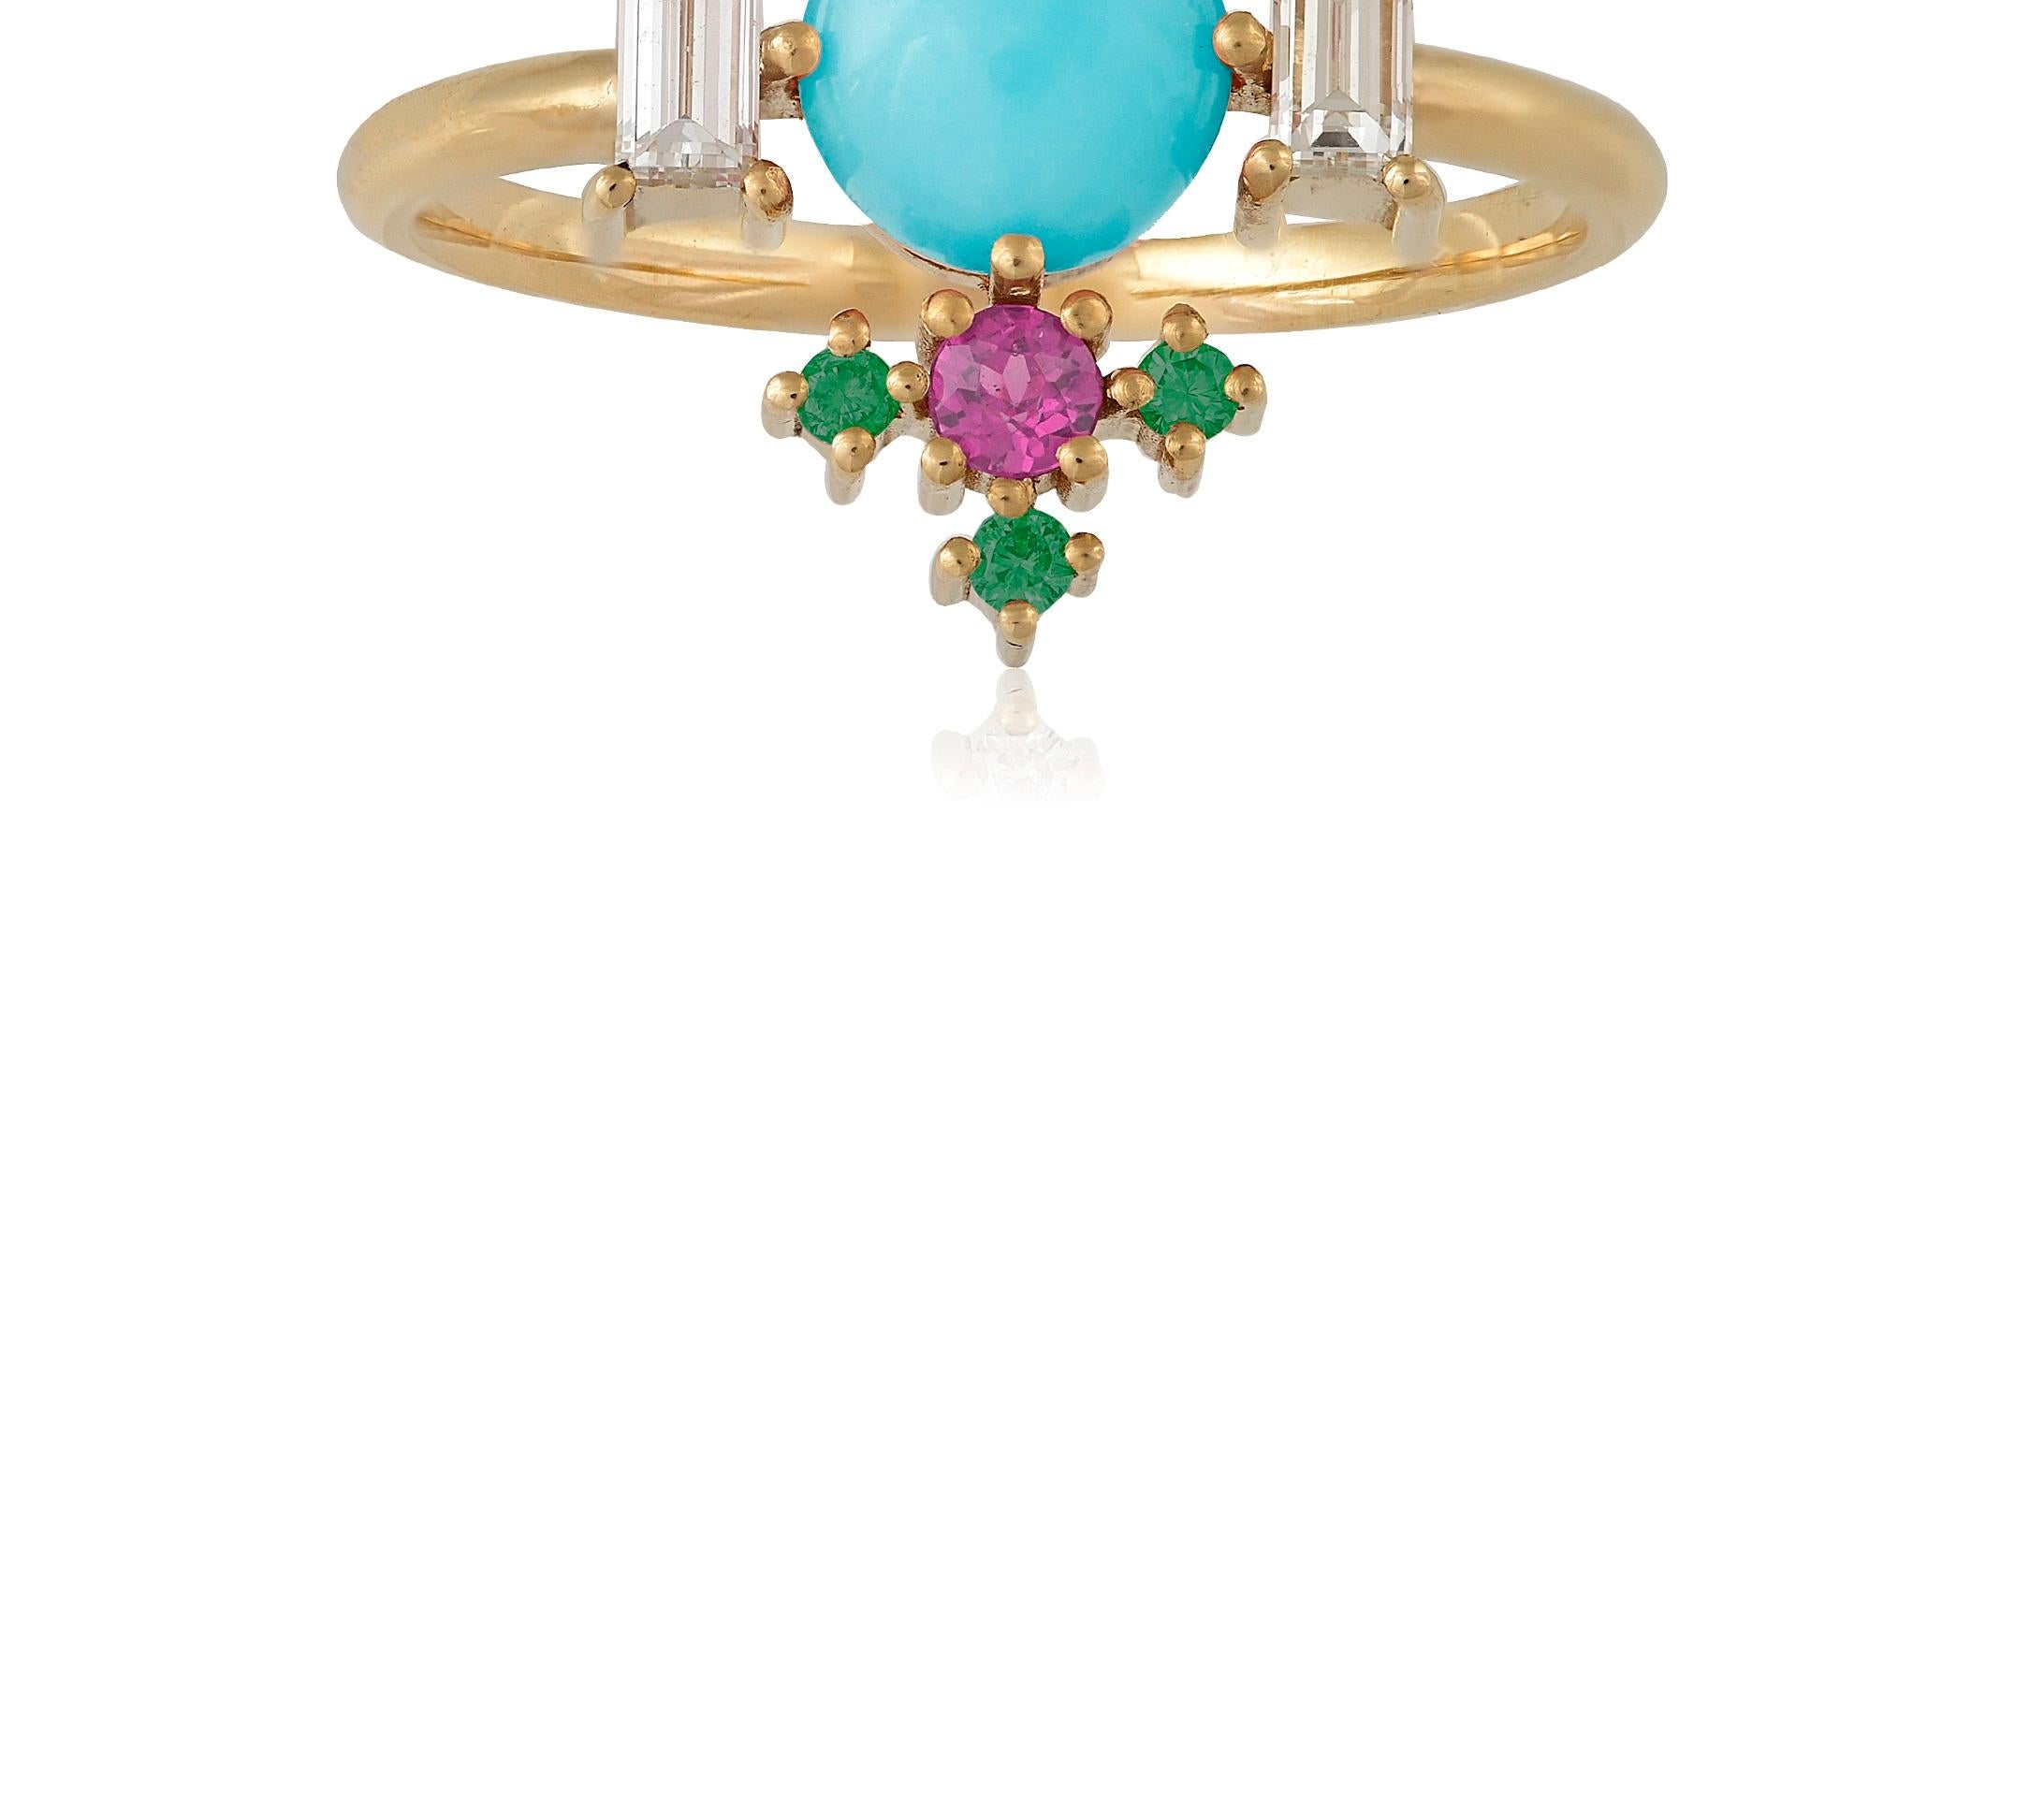 Designer: Alexia Gryllaki
Dimensions: L18x21mm
Ring Size UK P, US 7 3/4
Weight: approximately 4.0g  
Barcode: OFS059

Multi-stone ring in 18 karat yellow gold with a round cabochon stab. turquoise approx. 0.55cts, round faceted pink sapphires